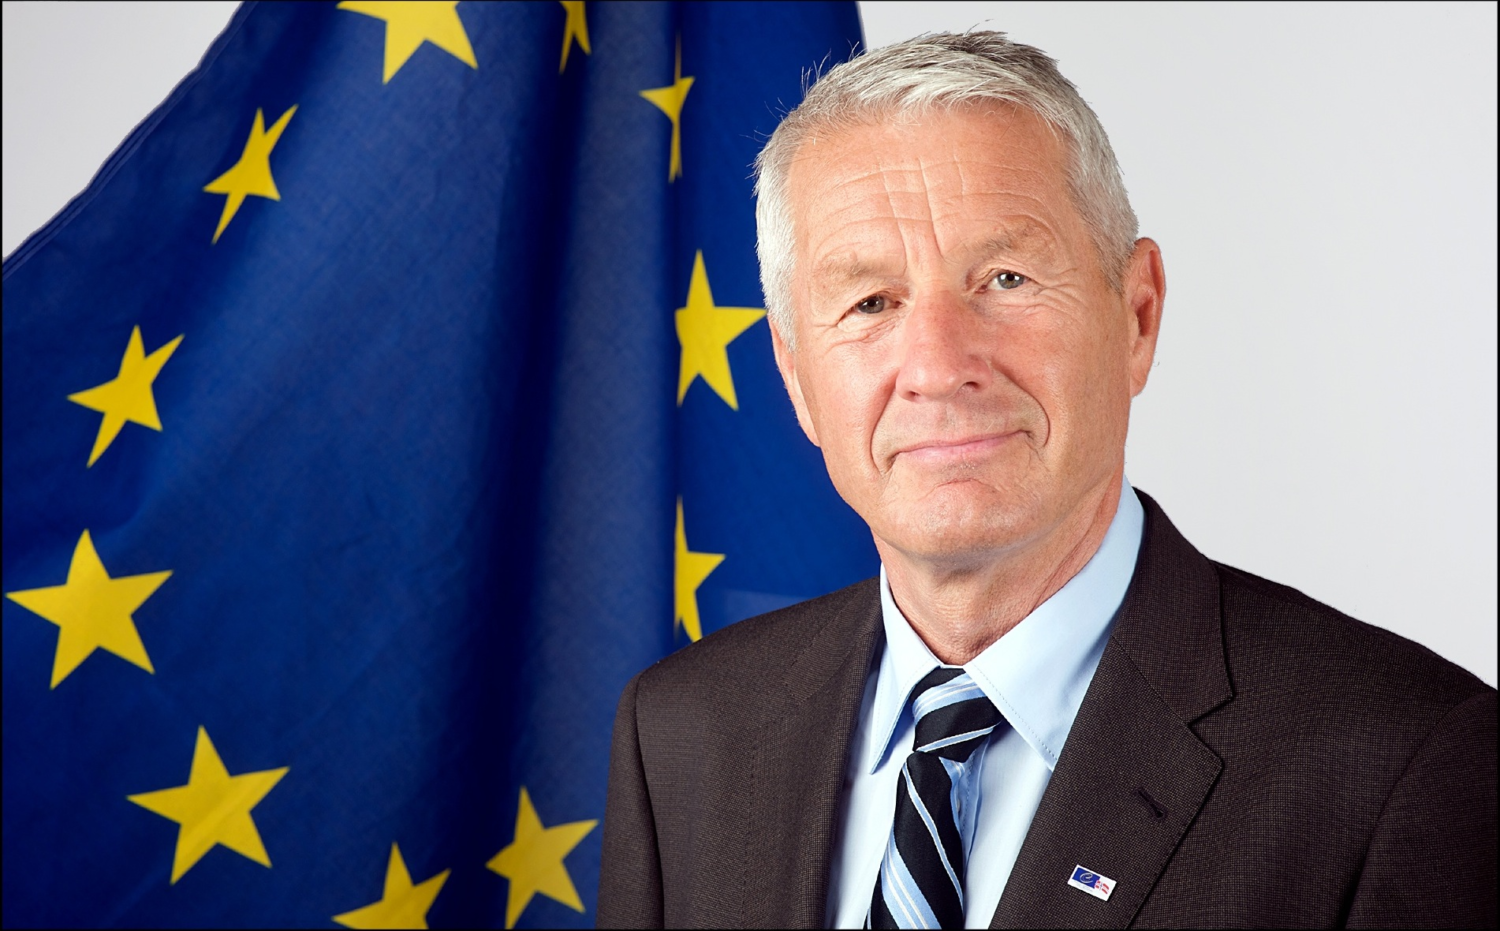 Thorbjorn Jagland is re-elected as the CE Secretary General